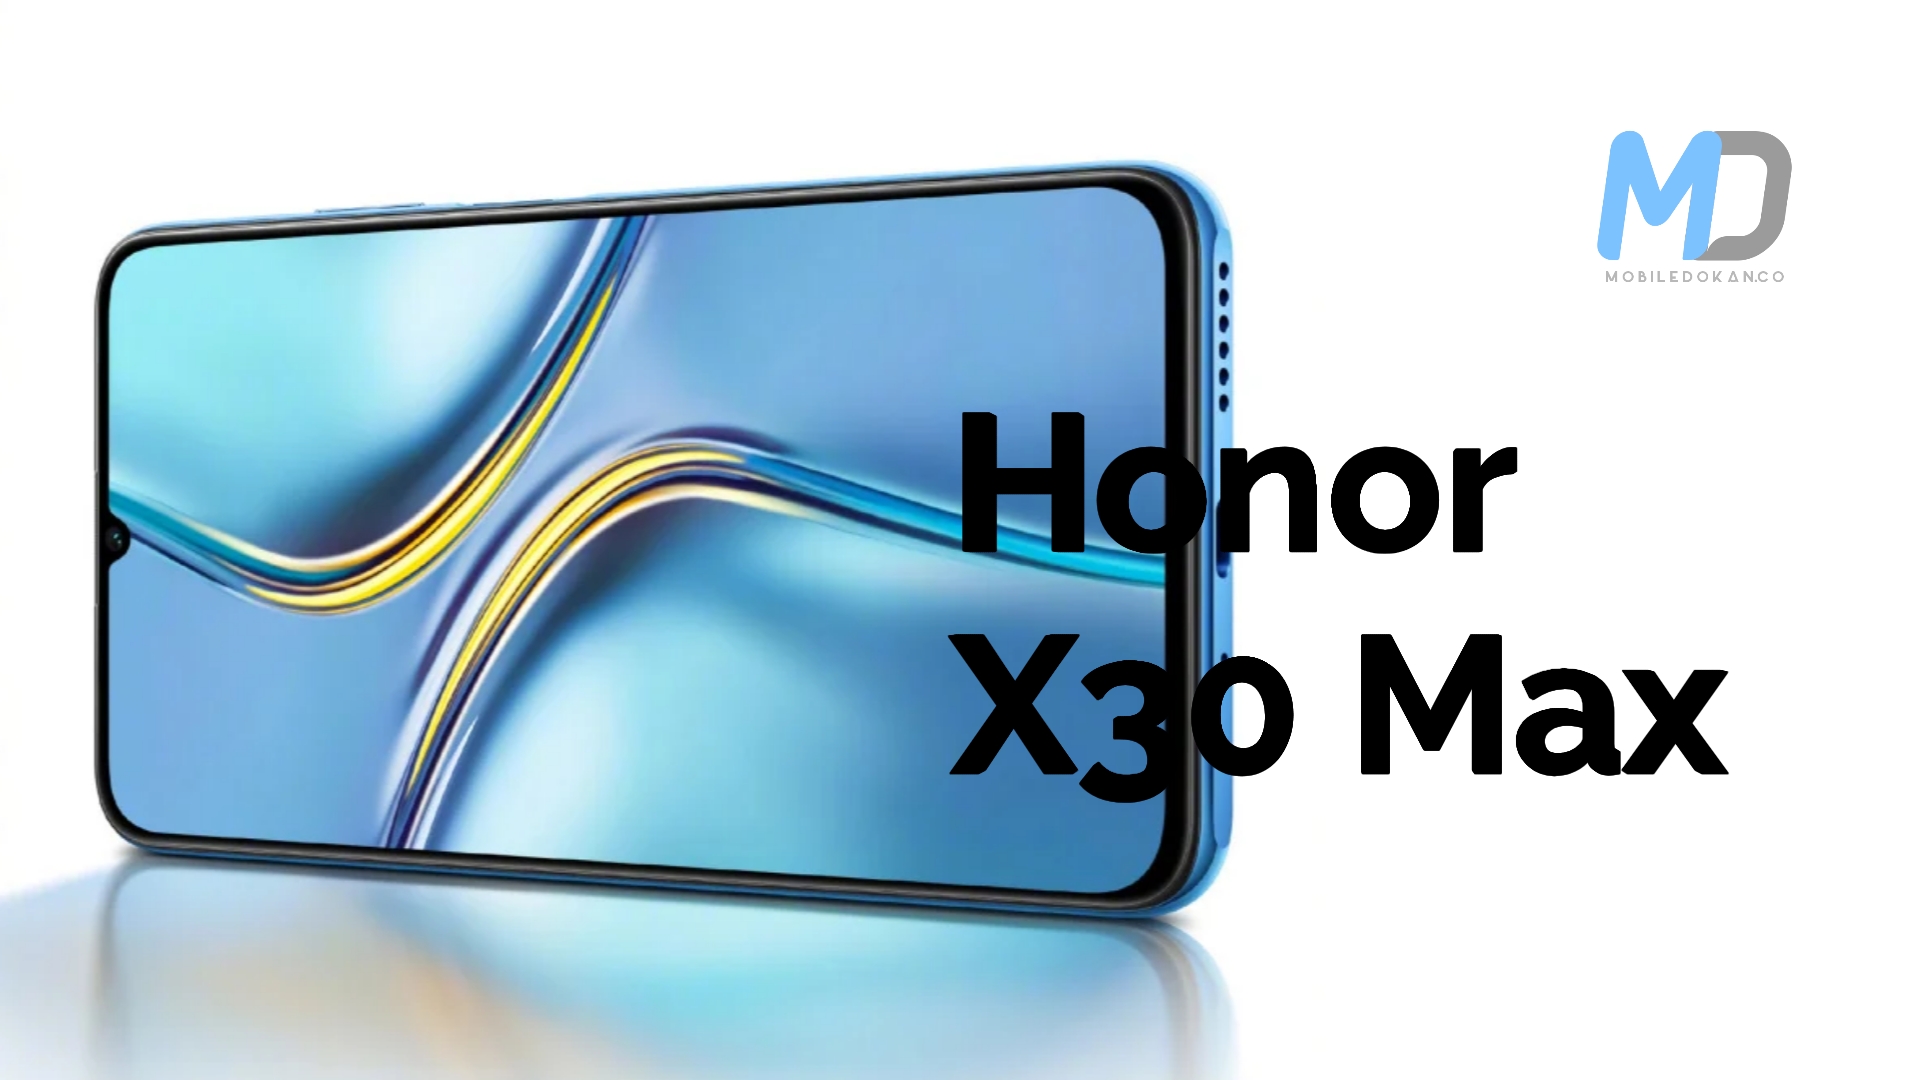 Honor X30 Max teaser leaked the front design and a waterdrop notch